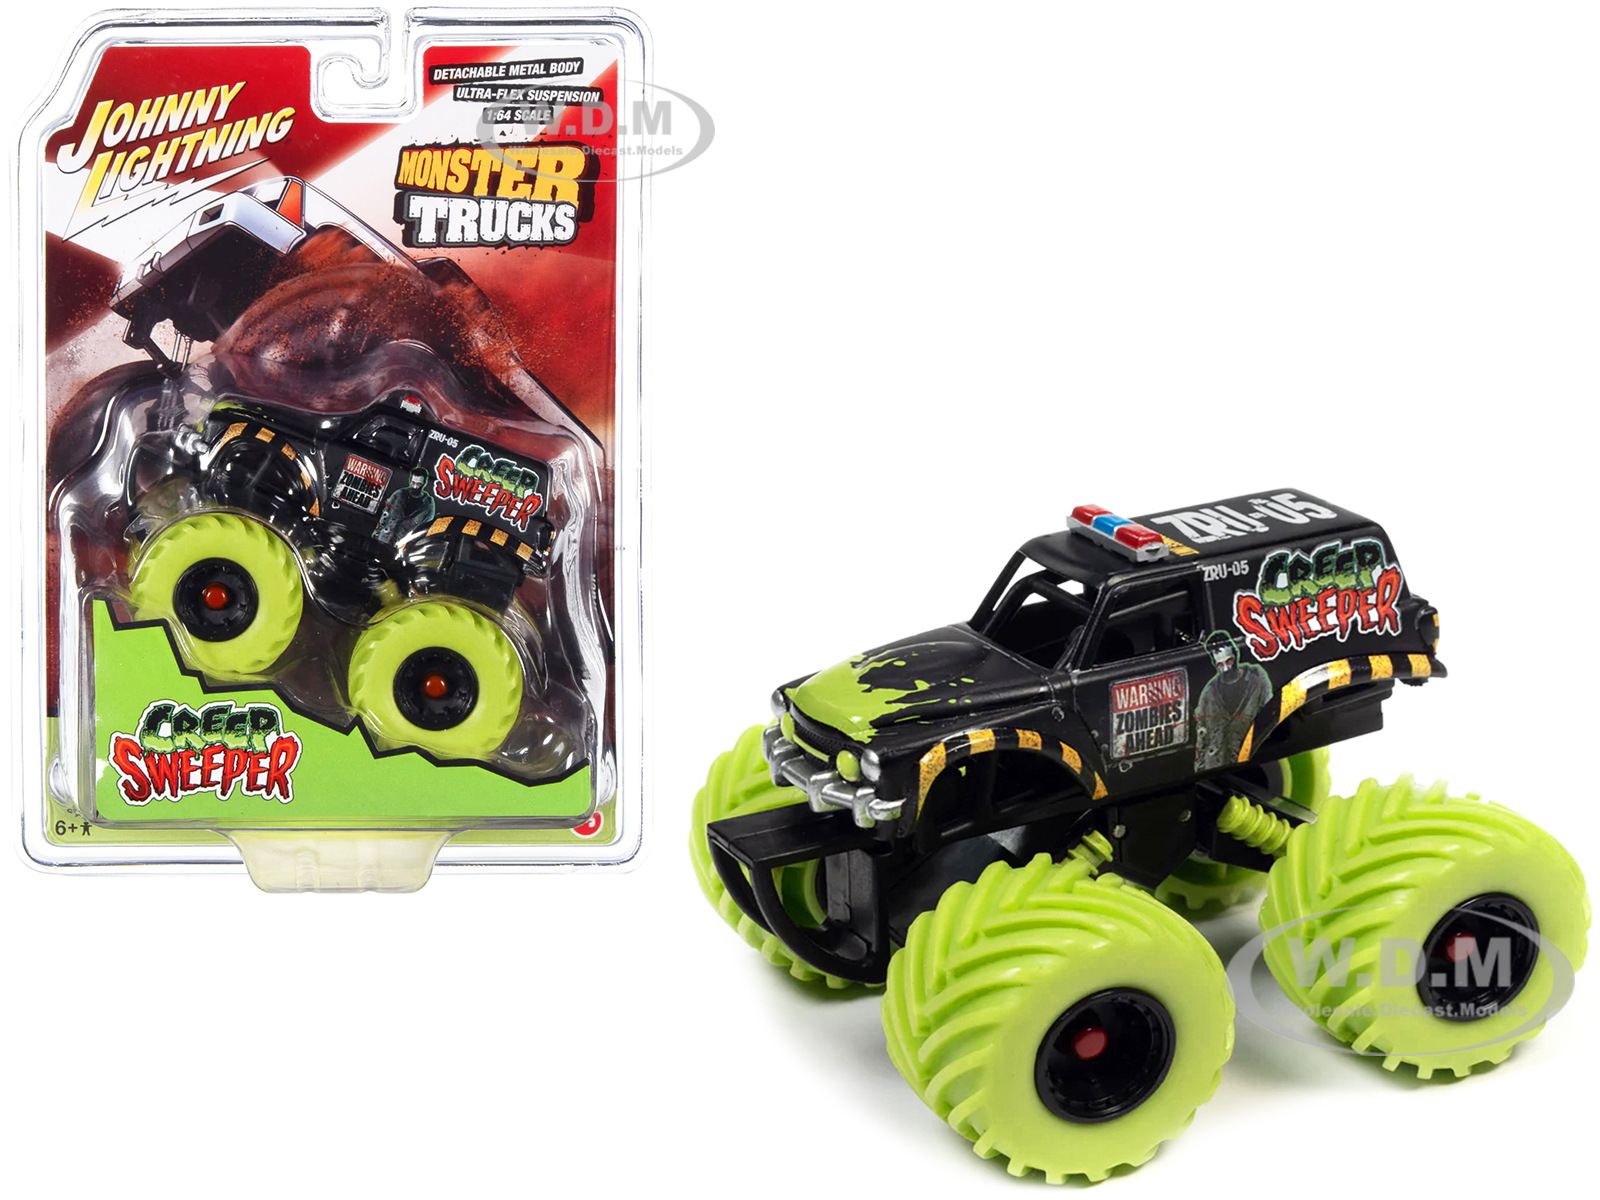 "Creep Sweeper" Monster Truck "Zombie Response Unit" with Driver Figure "Monster Trucks" Series 1/64 Diecast Model by Johnny Lightning